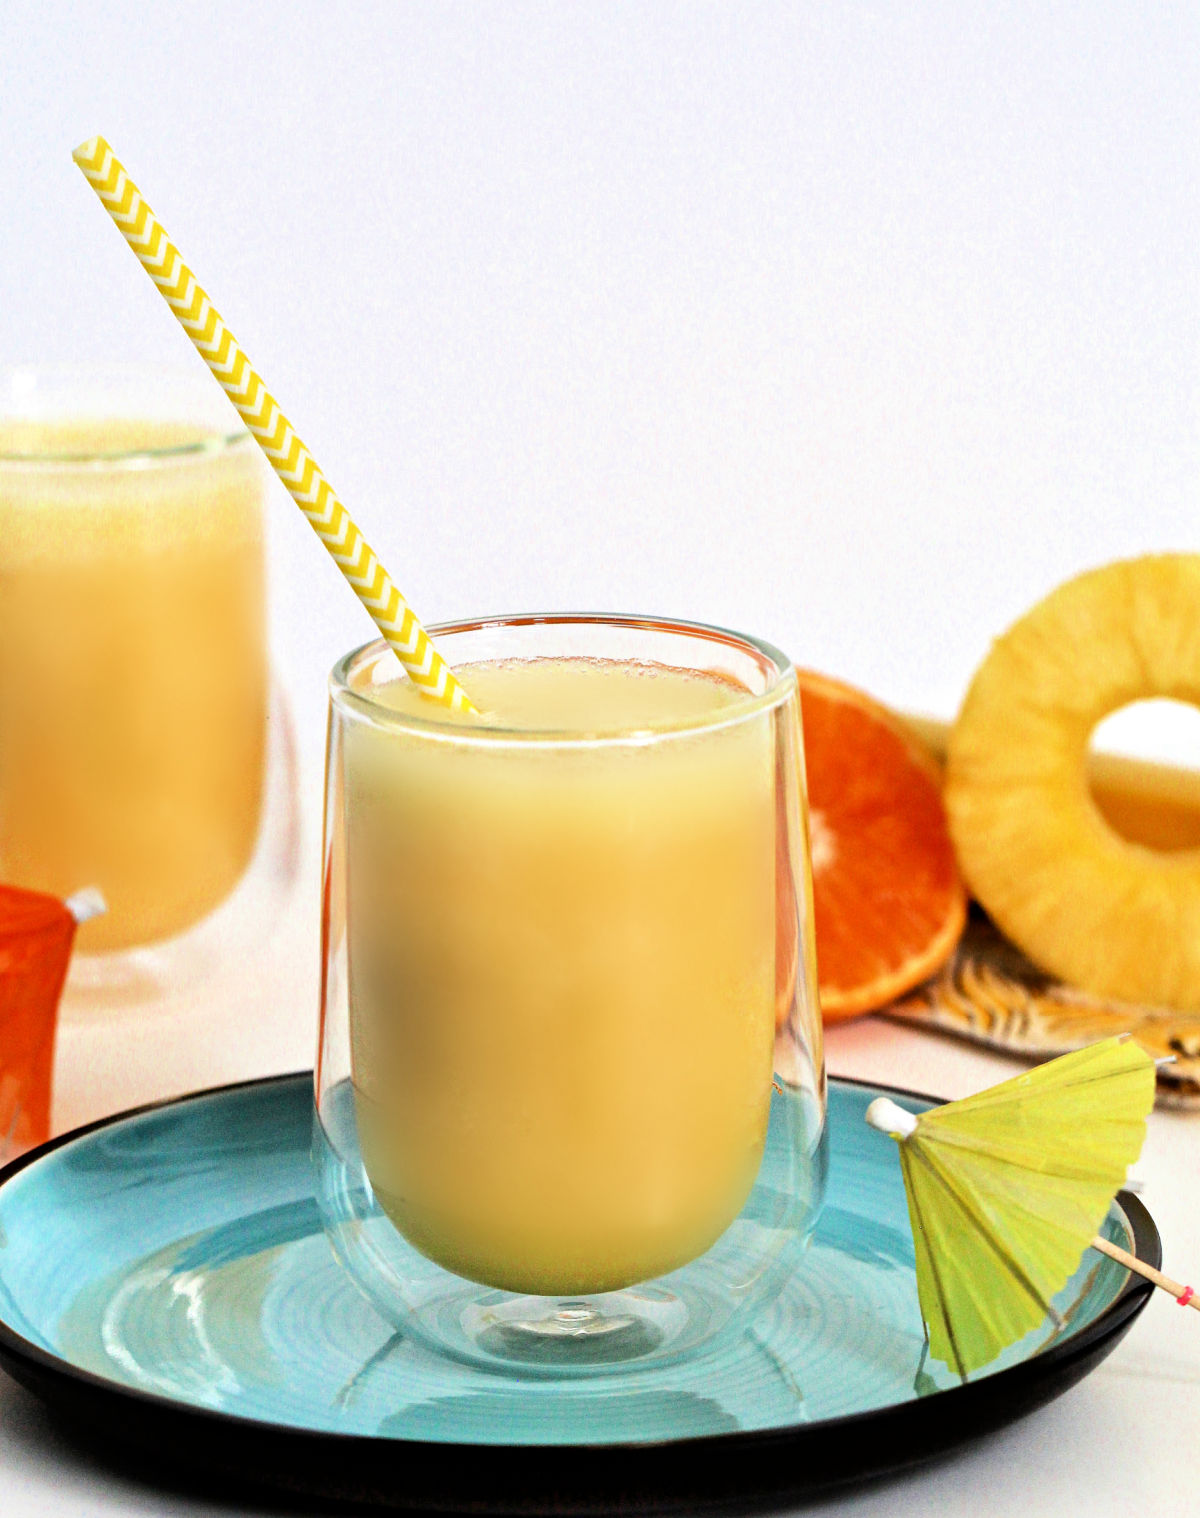 Smoothie in a glass with a yellow and white striped straw.